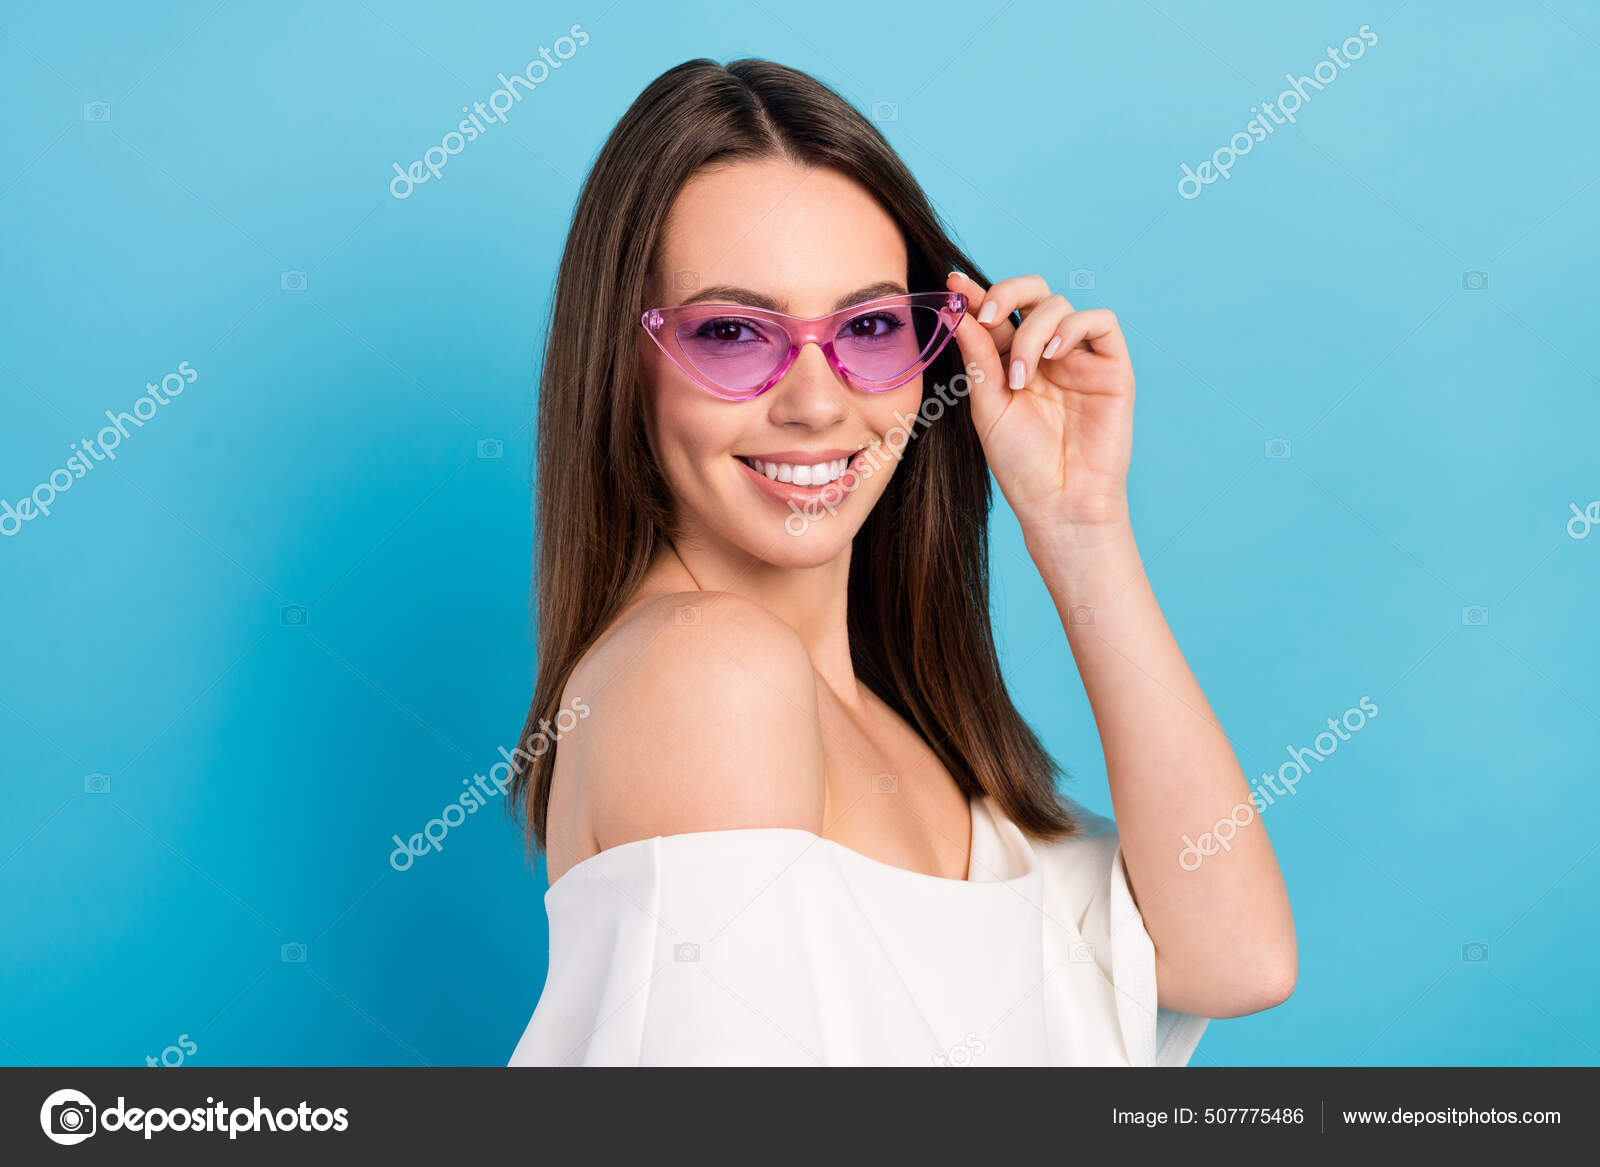 Specs Girl Png Image - Corporate Pose, Transparent Png , Transparent Png  Image - PNGitem